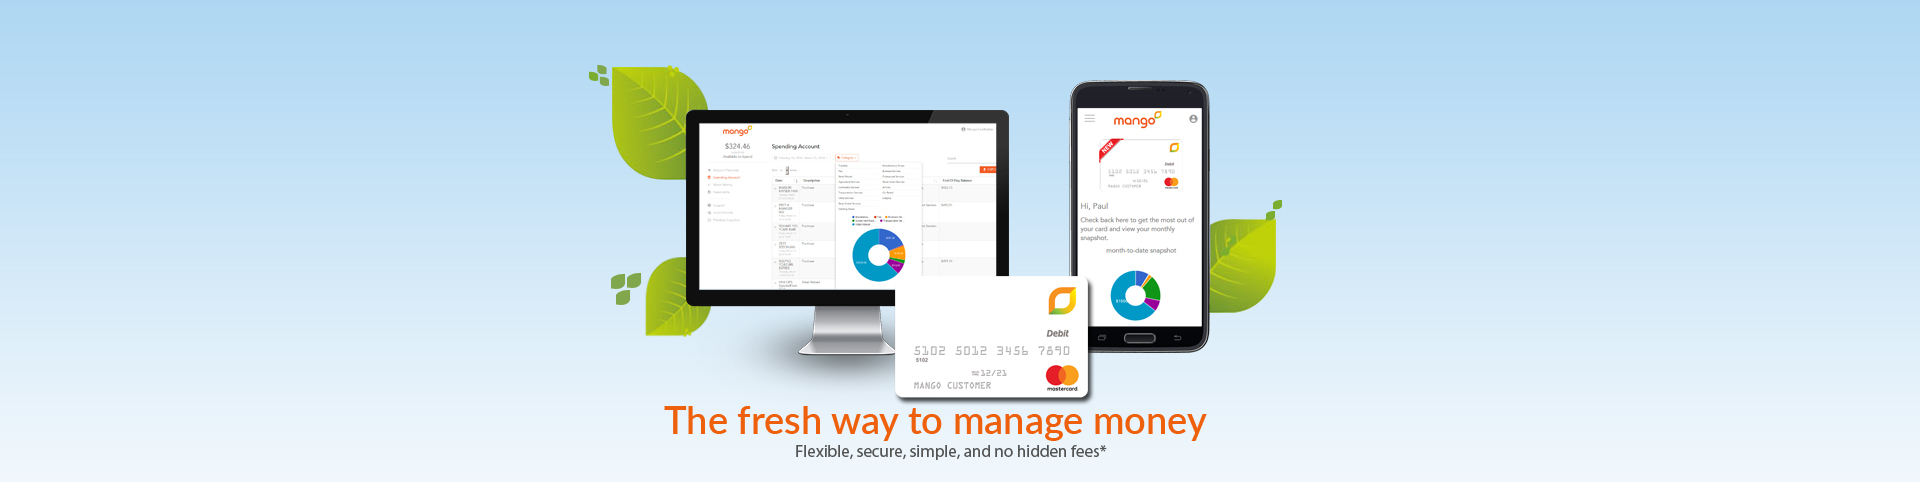 The-fresh-way-to-manage-money-2